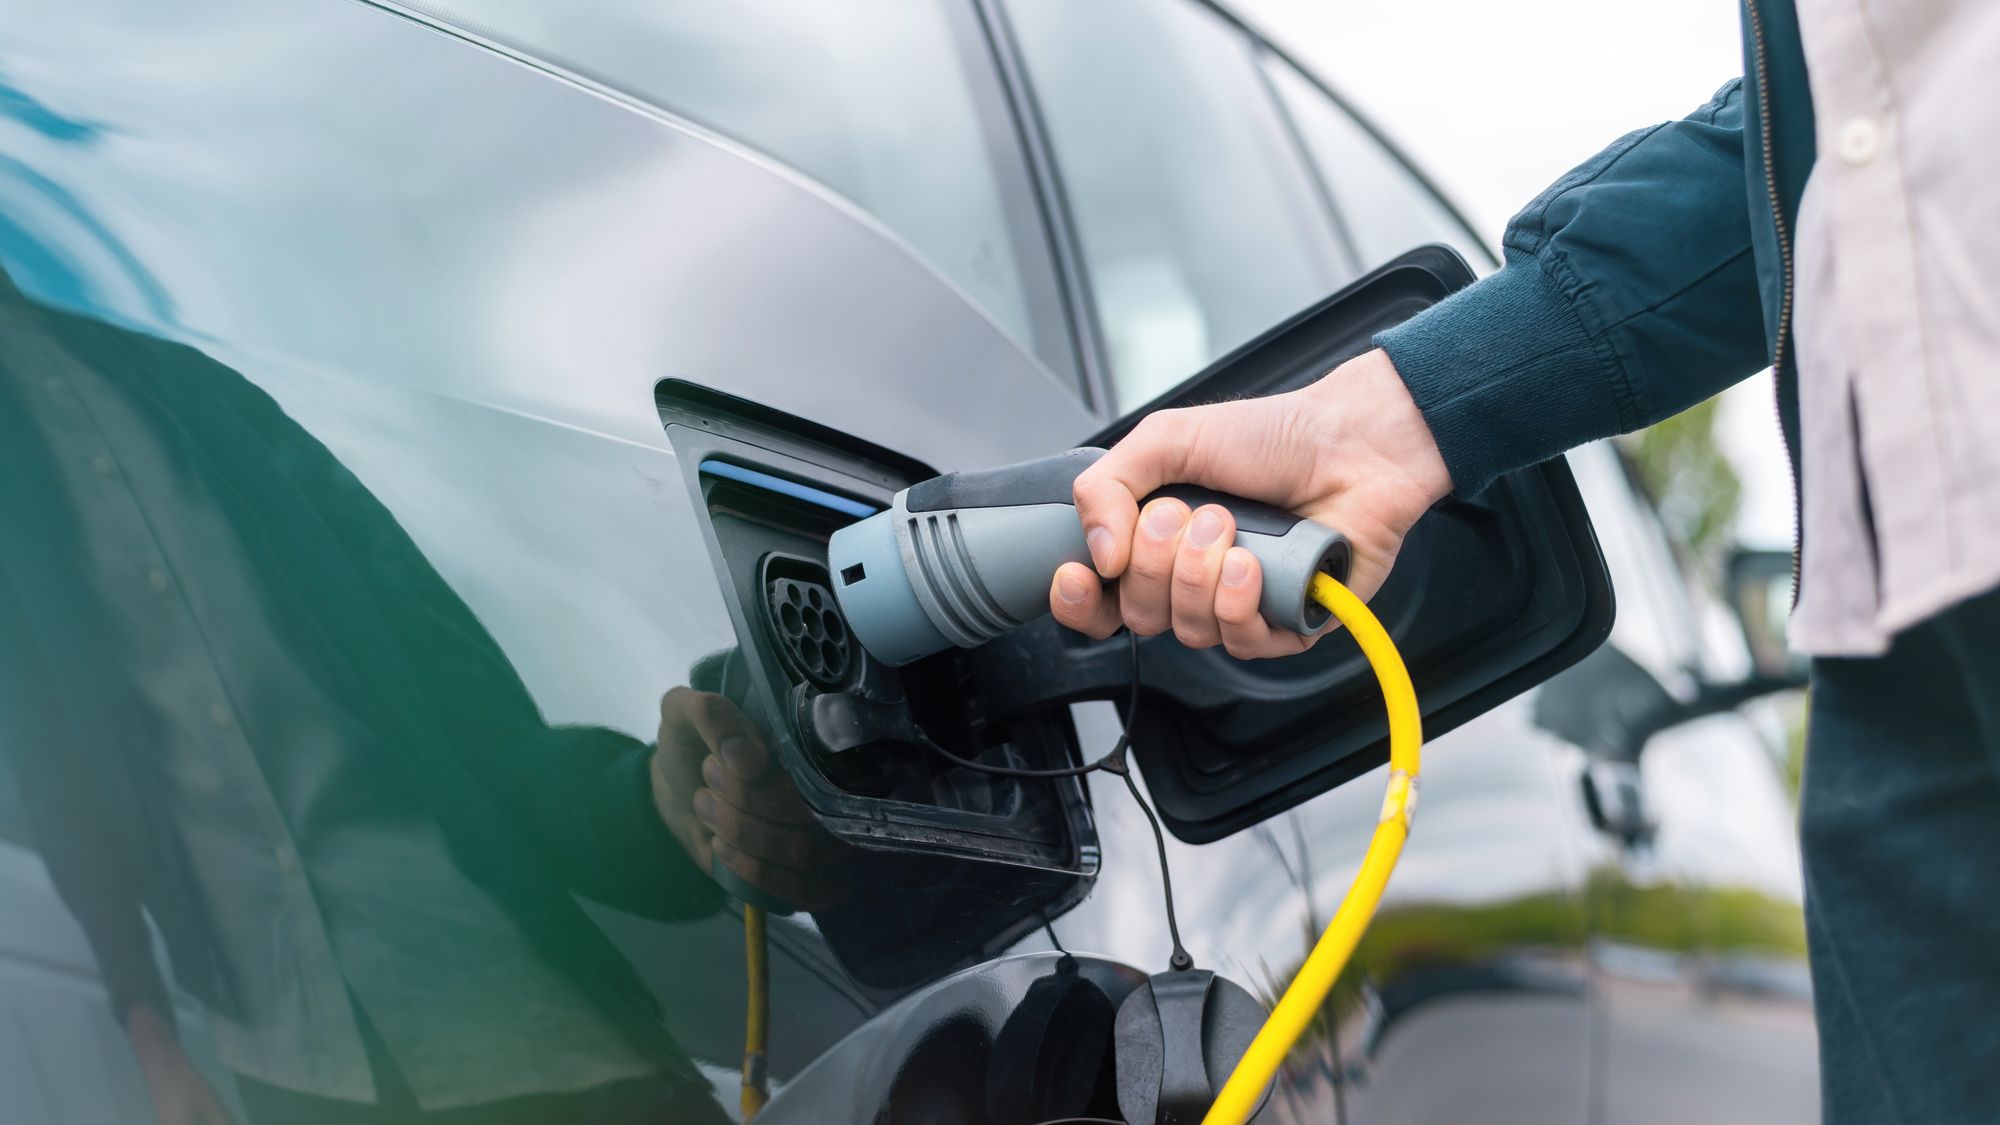 EVs might cost half of Gas Cars by 2030